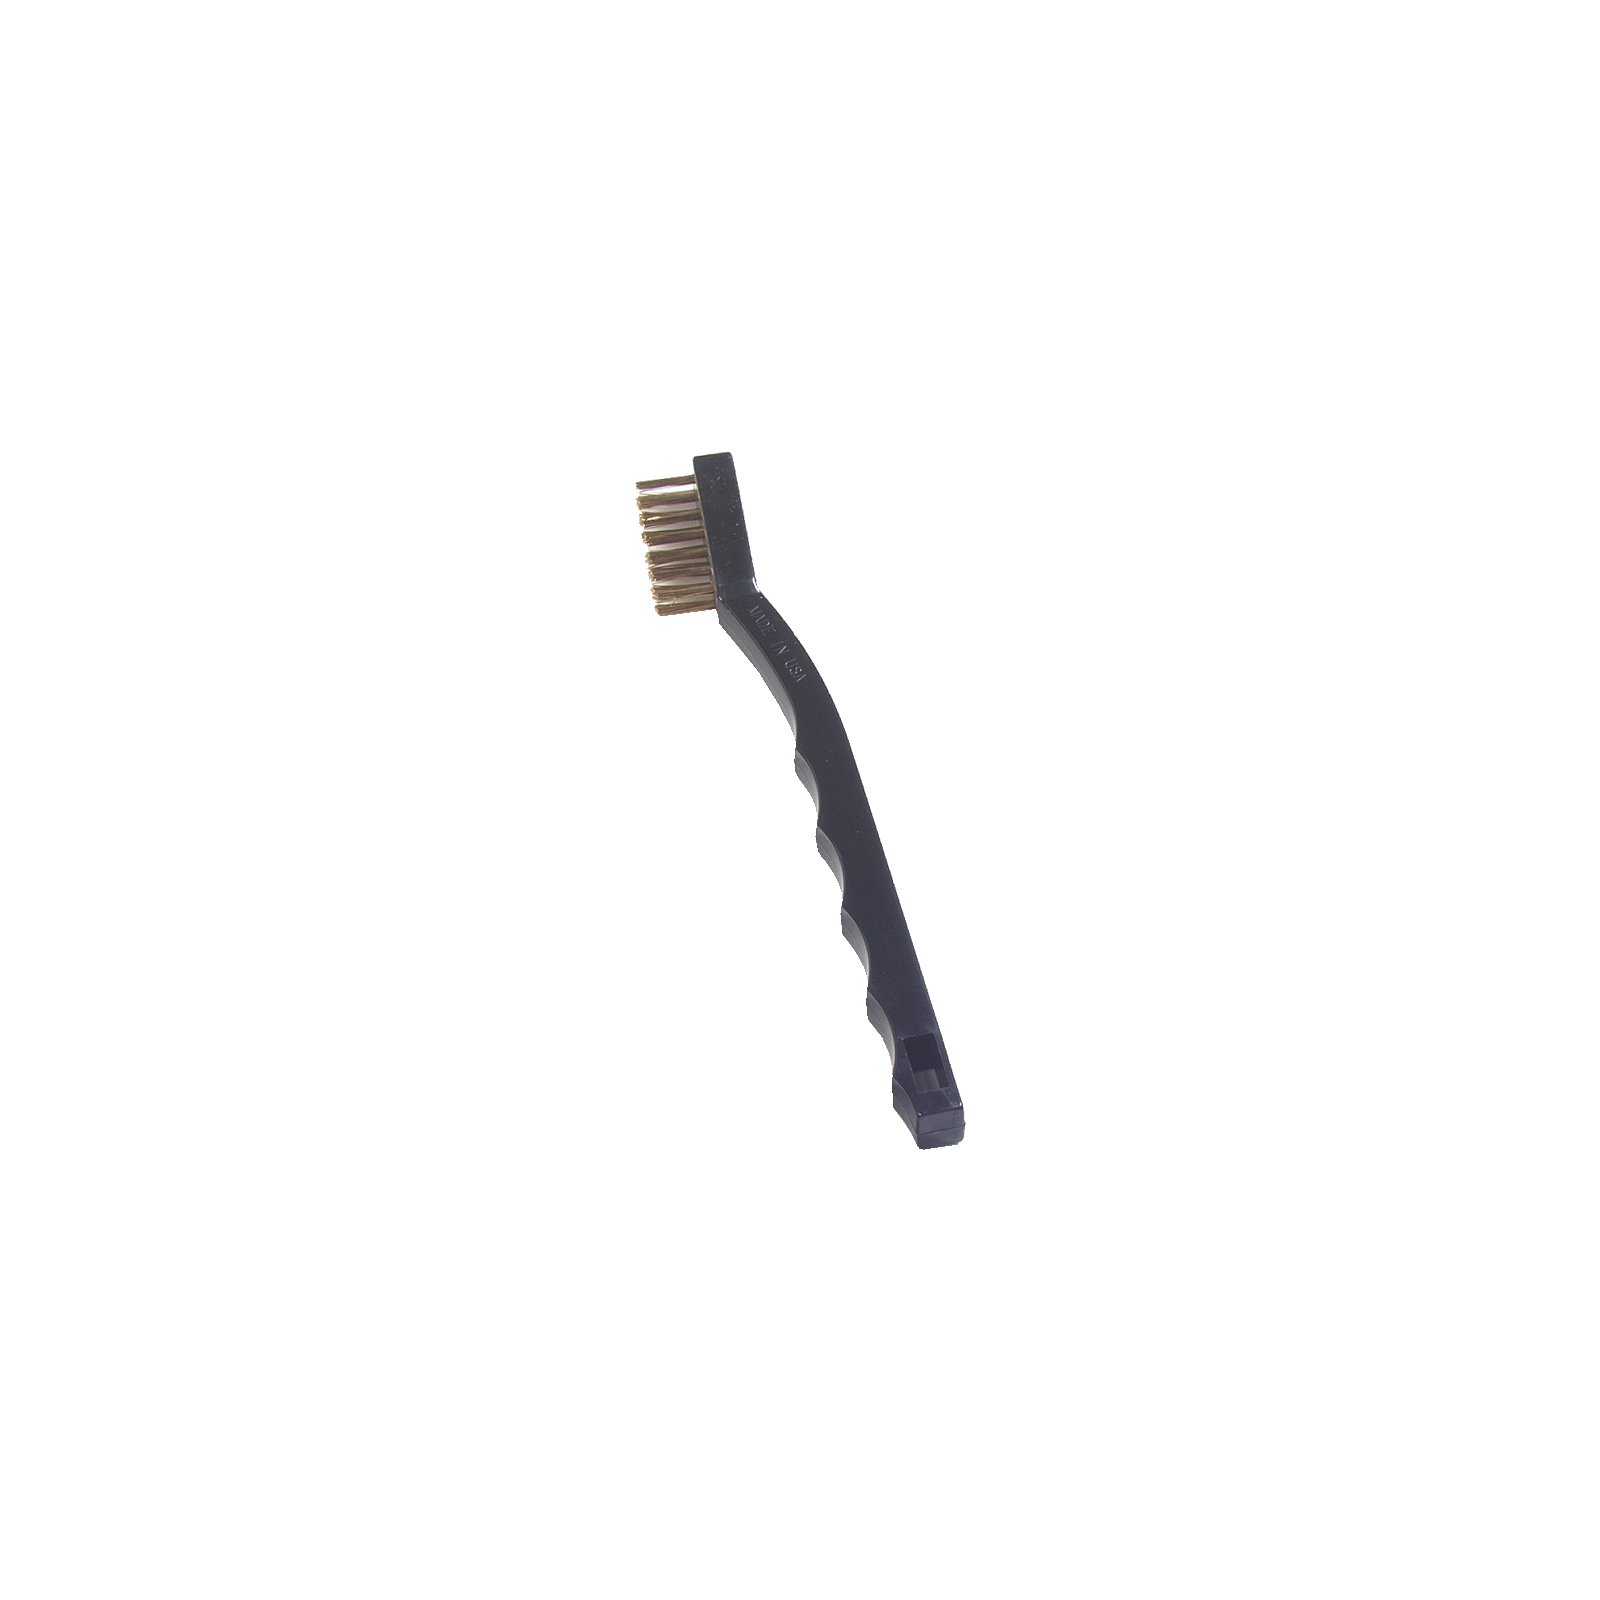 Flo-Thru Solvent Parts Washer Brush - Kimball Midwest